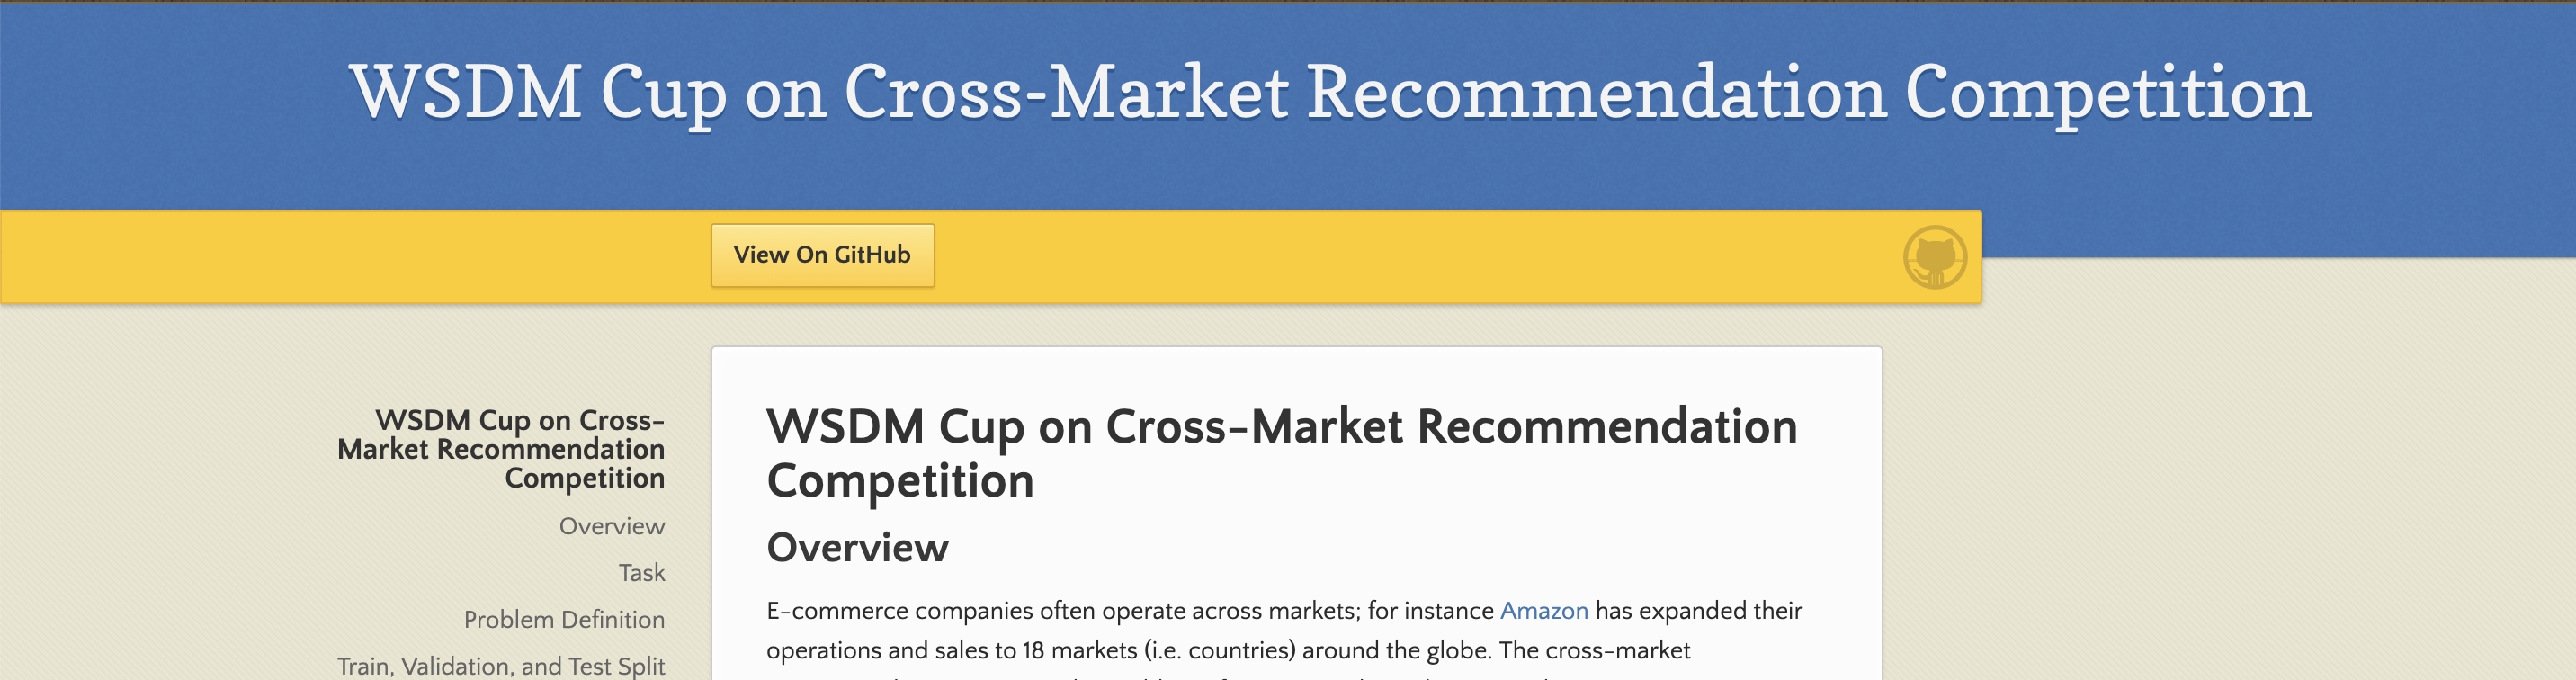 WSDM Cup on “Cross-Market Item Recommendation”